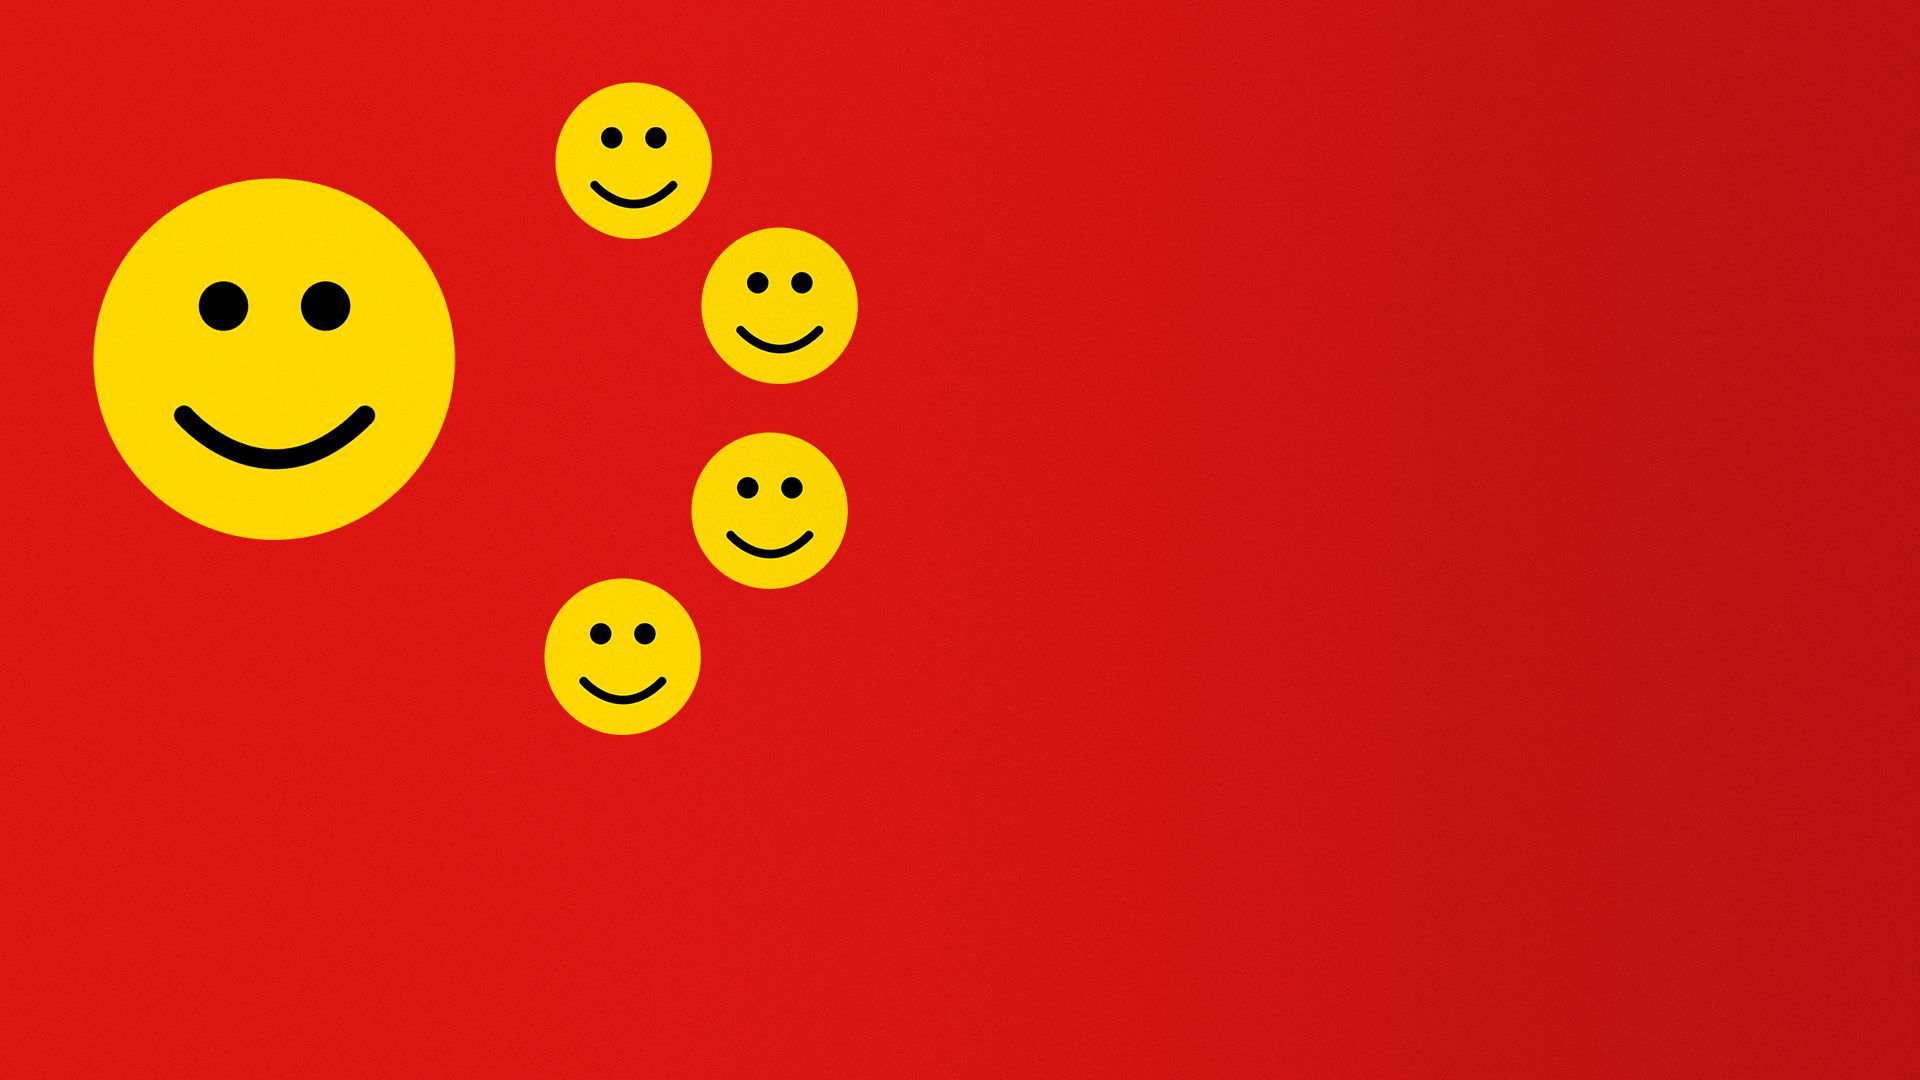 Illustration of China's flag with smiley faces replacing the stars.